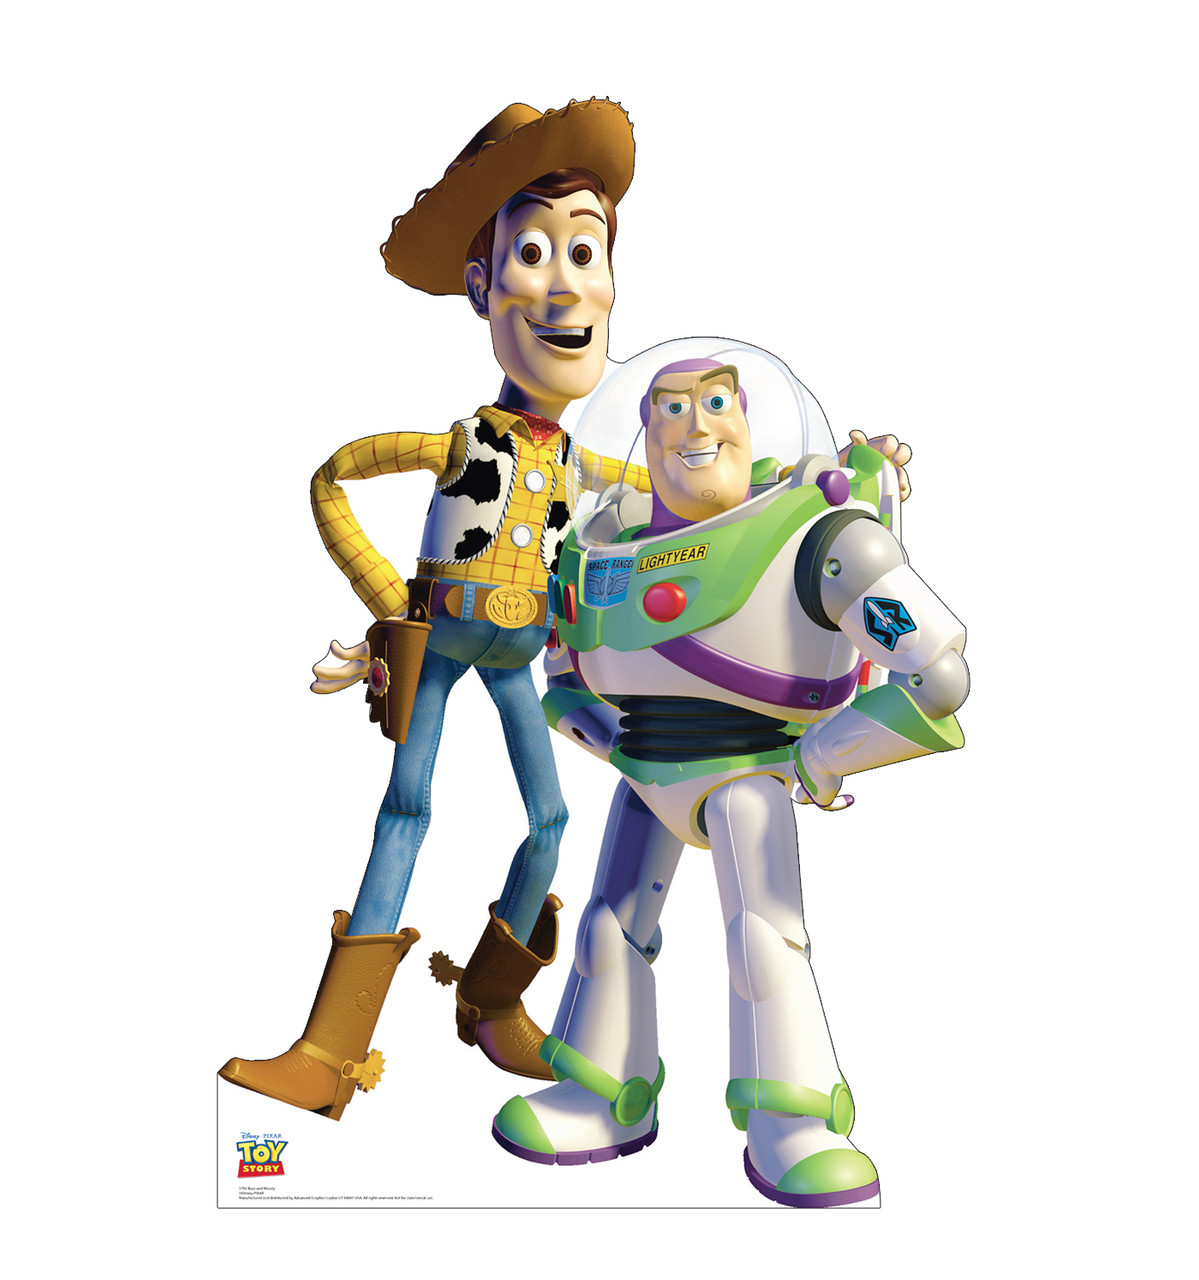 Life-size cardboard standee of Buzz and Woody from Disney's Toy Story.